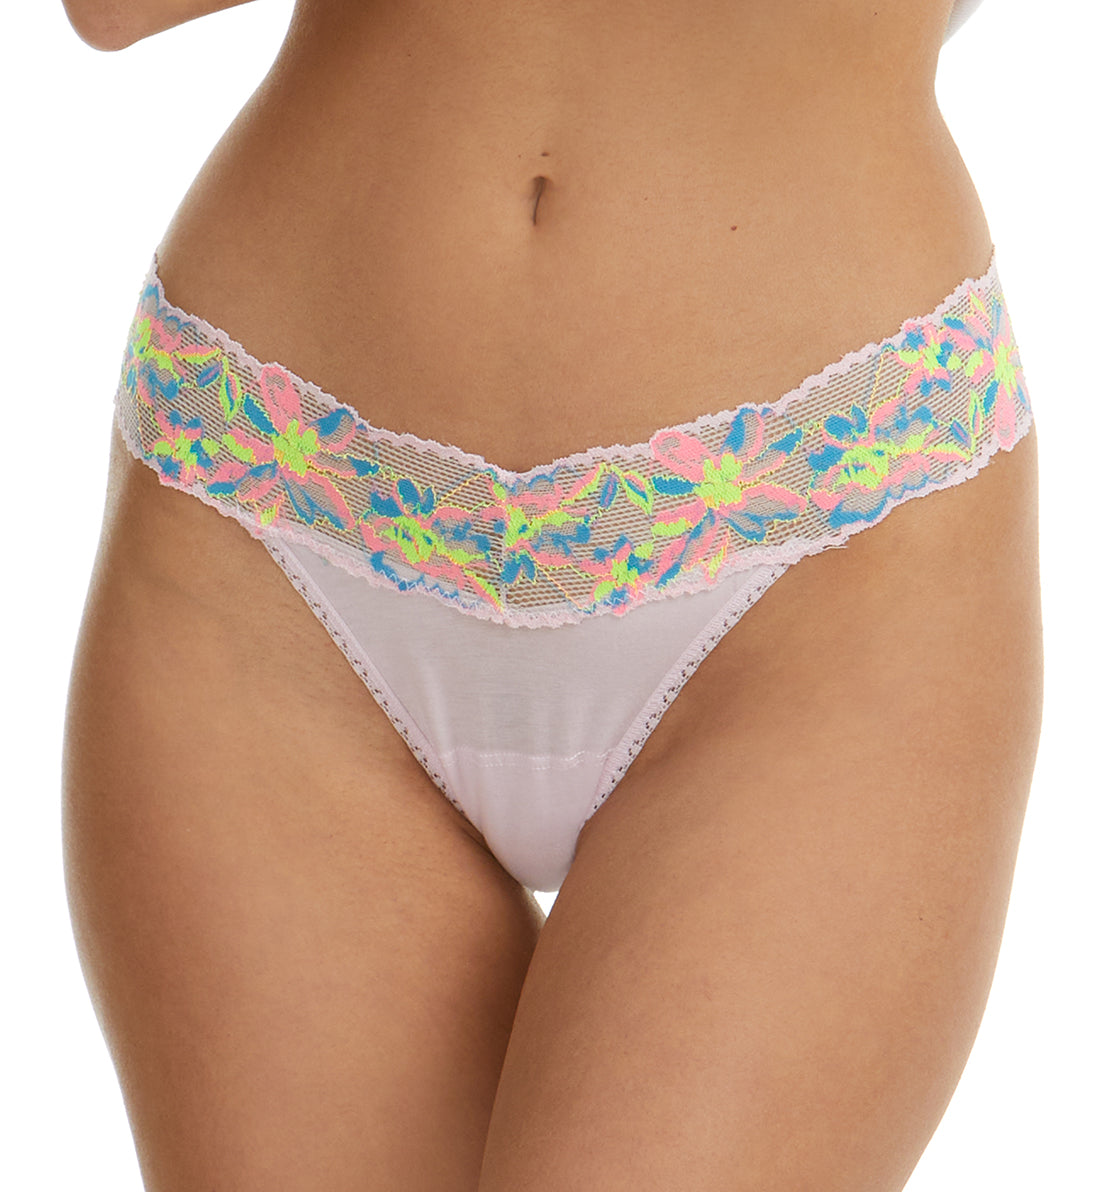 Hanky Panky Neon Lights Cotton-Spandex Low Rise Thong (891592),Pink Multi - Pink Multi,One Size